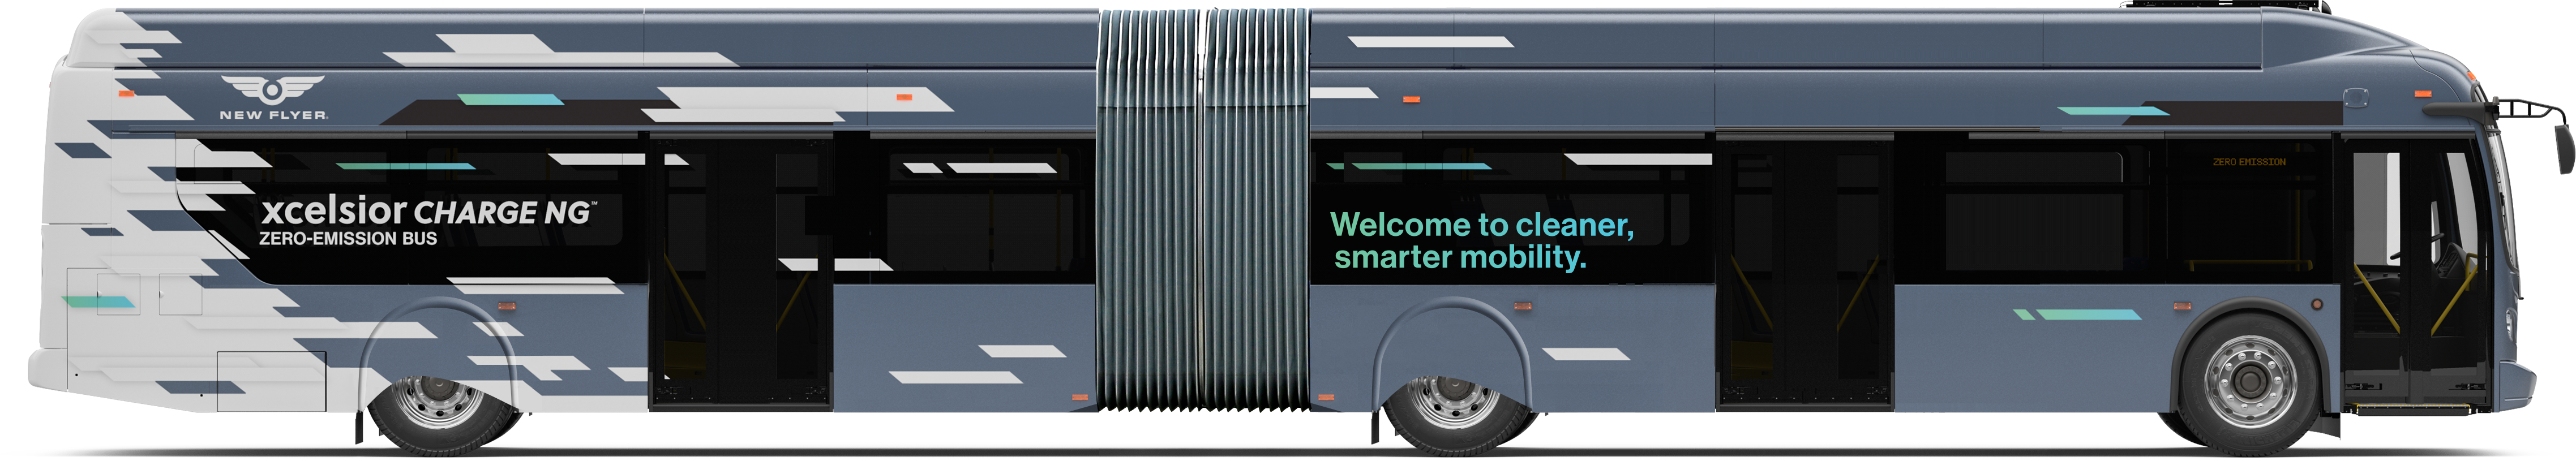 NFI subsidiary New Flyer's Xcelsior Charge NG 60ft articulated, zero-emission transit bus